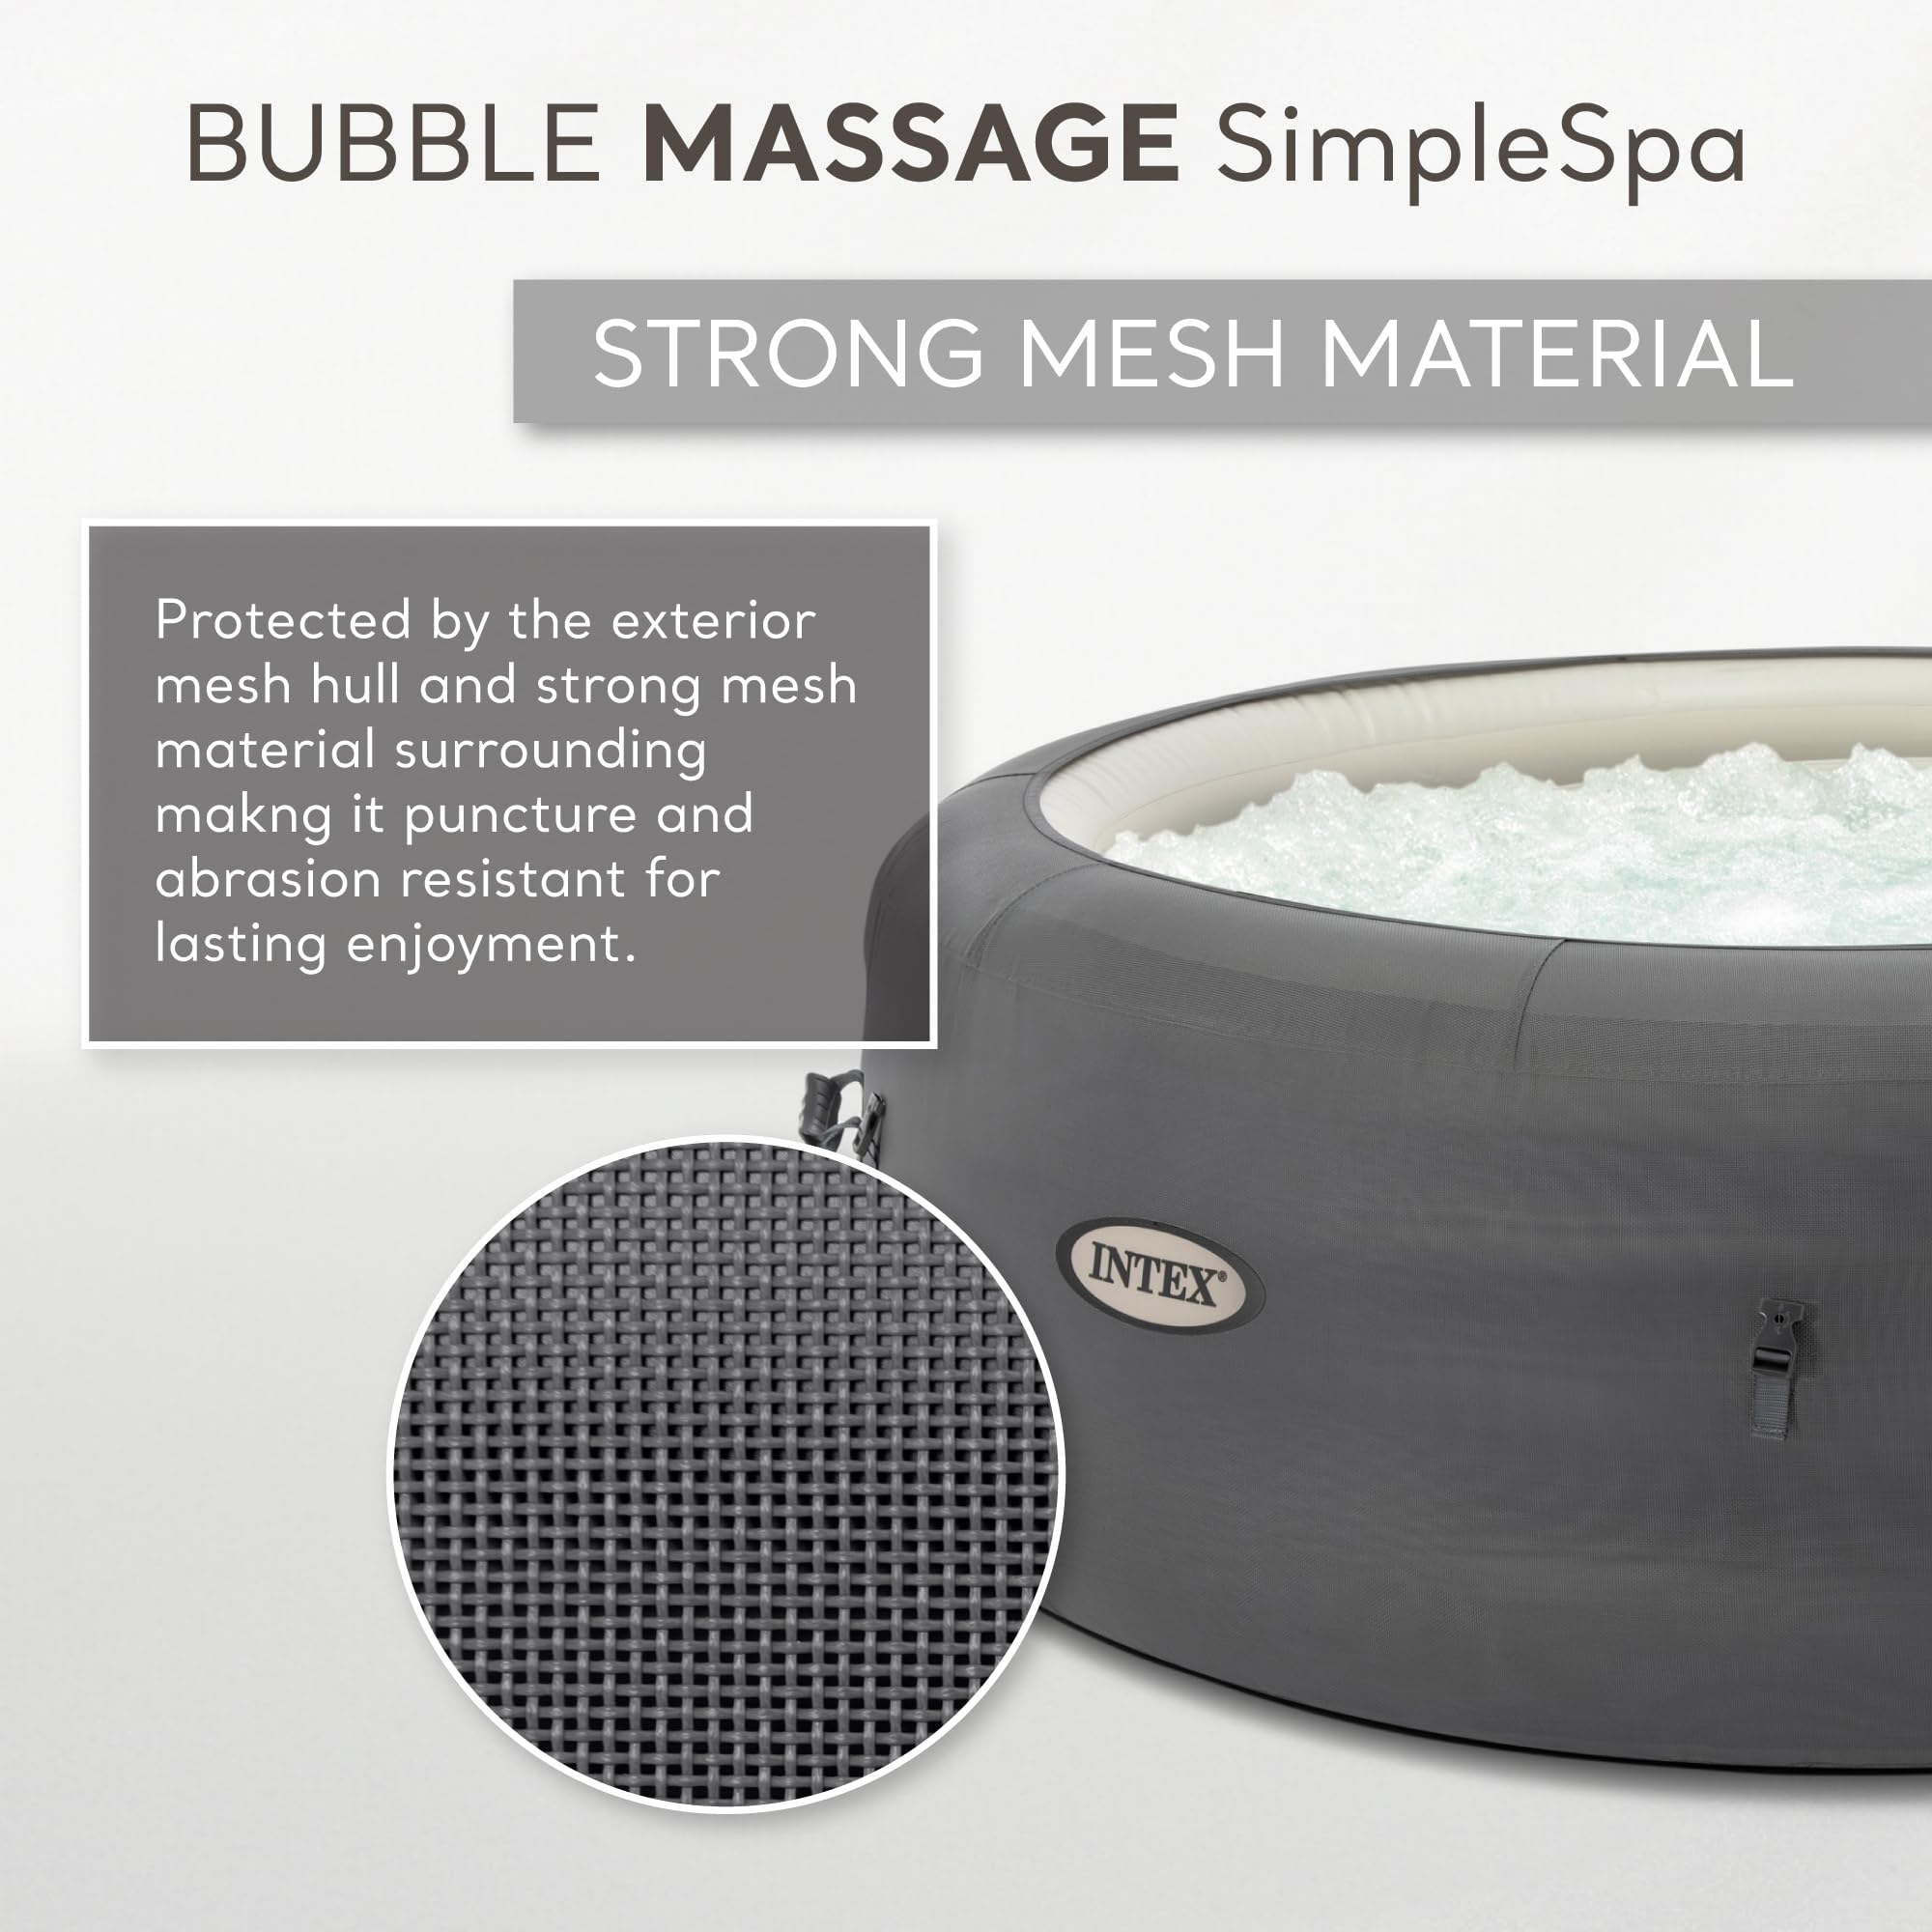 INTEX 28483E SimpleSpa Bubble Massage Spa: includes Insulated Cover – Built-in QuickFill Inflation – Soothing Jets – 4 Person Capacity – 77" x 26"